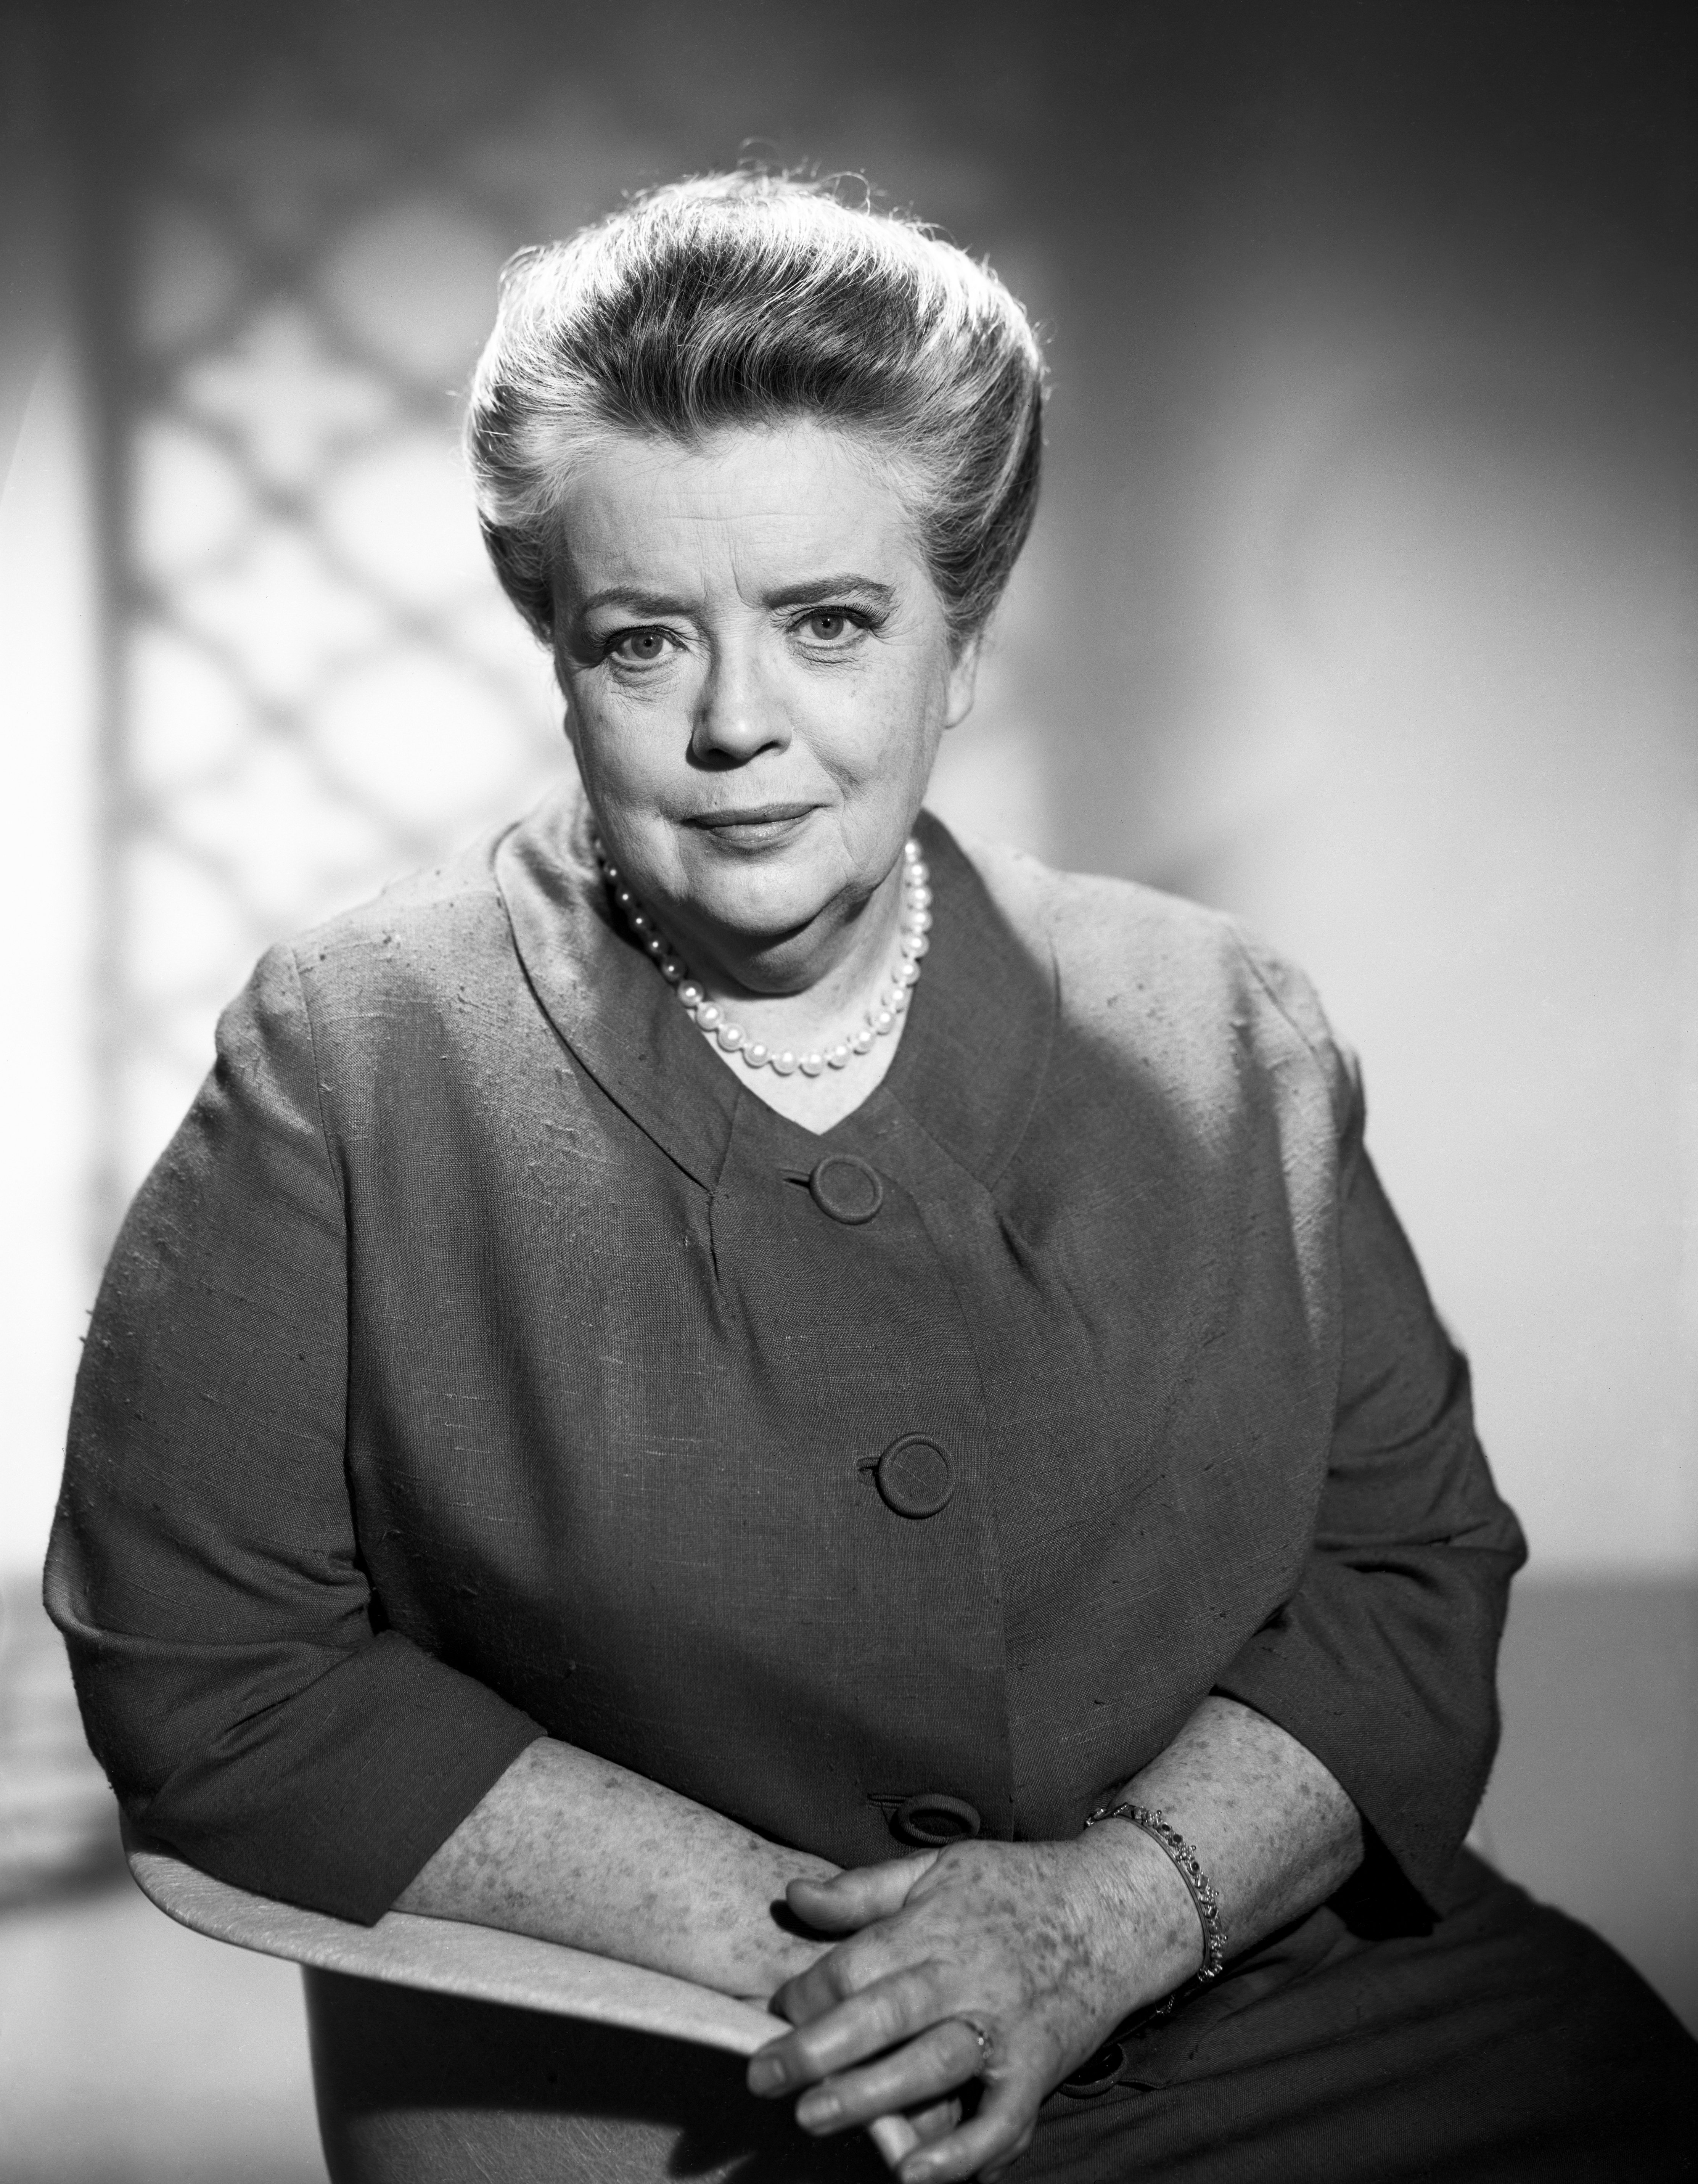 Frances Bavier as Aunt Bee Taylor in the series "The Andy Griffith Show" on March 16, 1965, in Hollywood, California. | Source: Getty Images